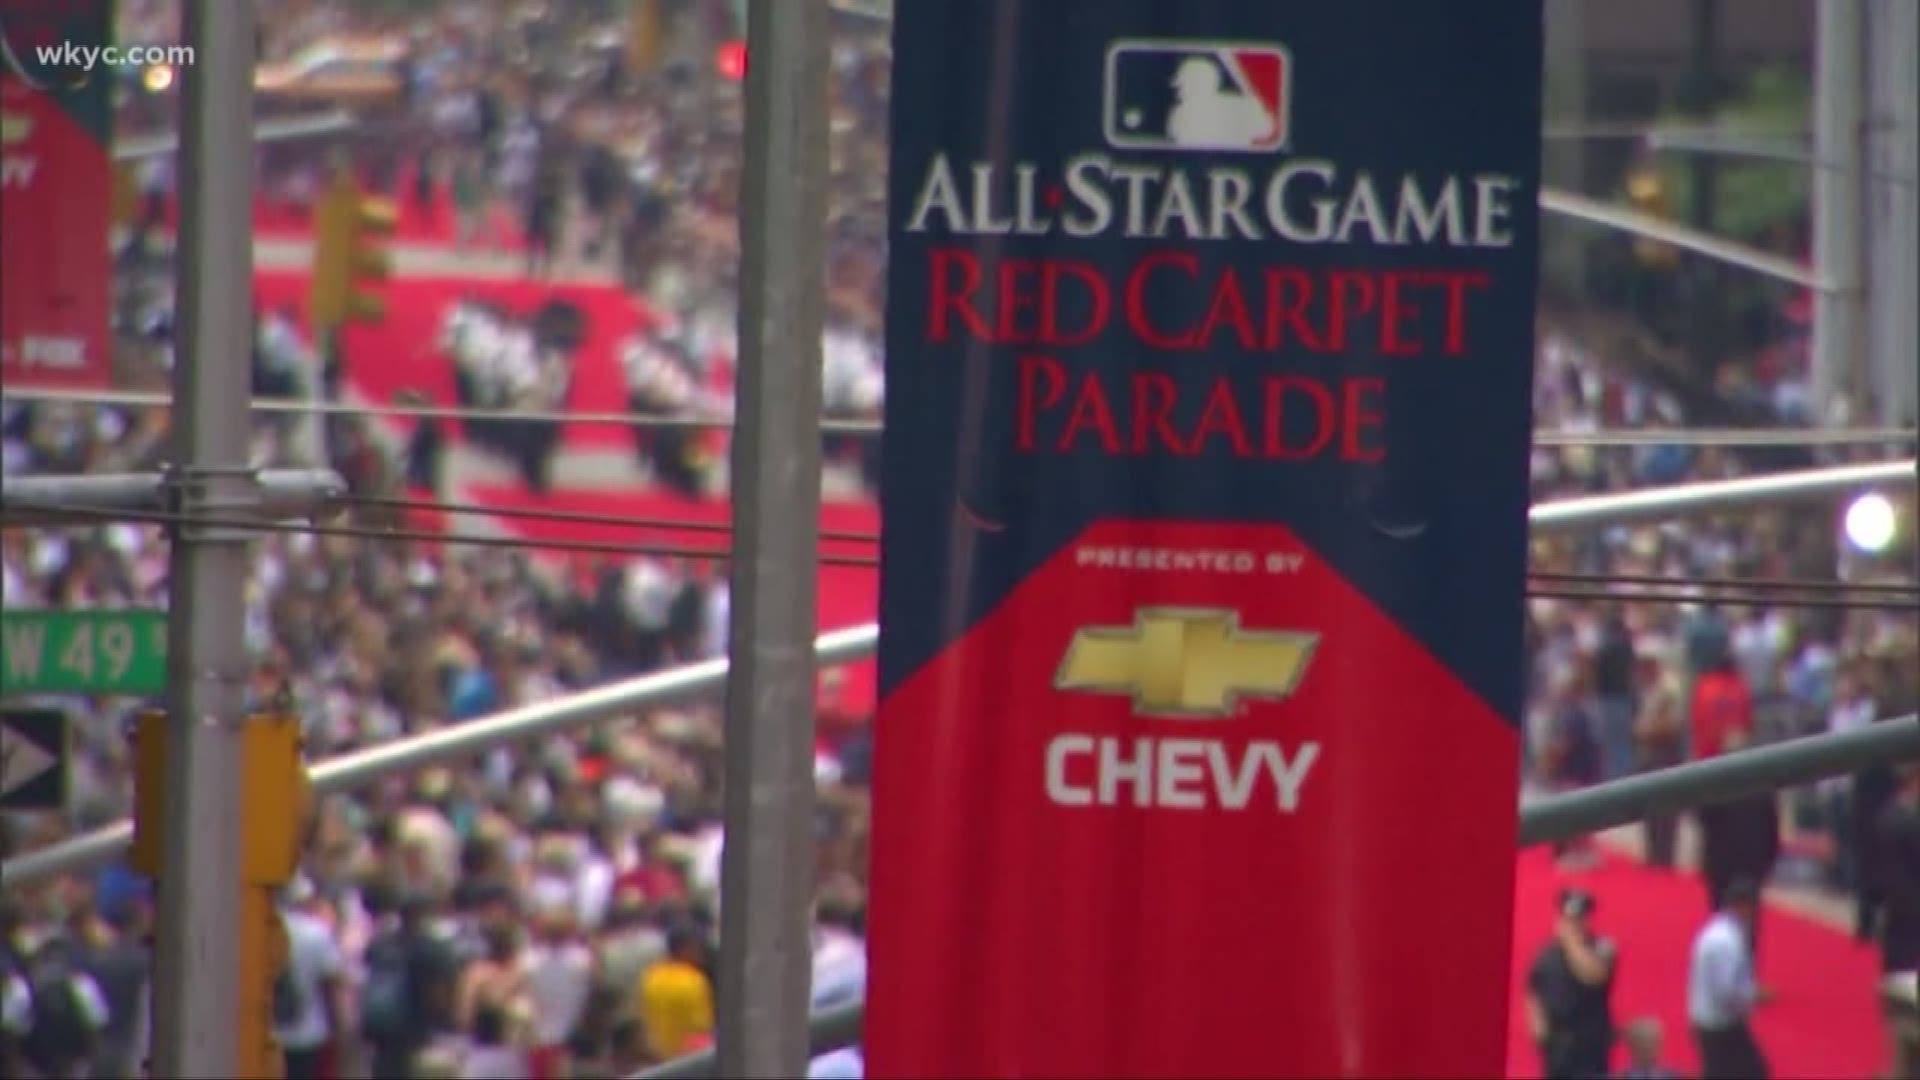 Cleveland is rolling out the red carpet as more than 70 MLB All-Stars will participate in a special parade through the city at 12:30 p.m. July 9 ahead of the 2019 All-Star Game at Progressive Field. MLB announced Tuesday that former Cleveland Indians favorites Jim Thome and Sandy Alomar Jr. will serve as Grand Marshals for the parade. They will lead the event in a 2019 Chevrolet Corvette.